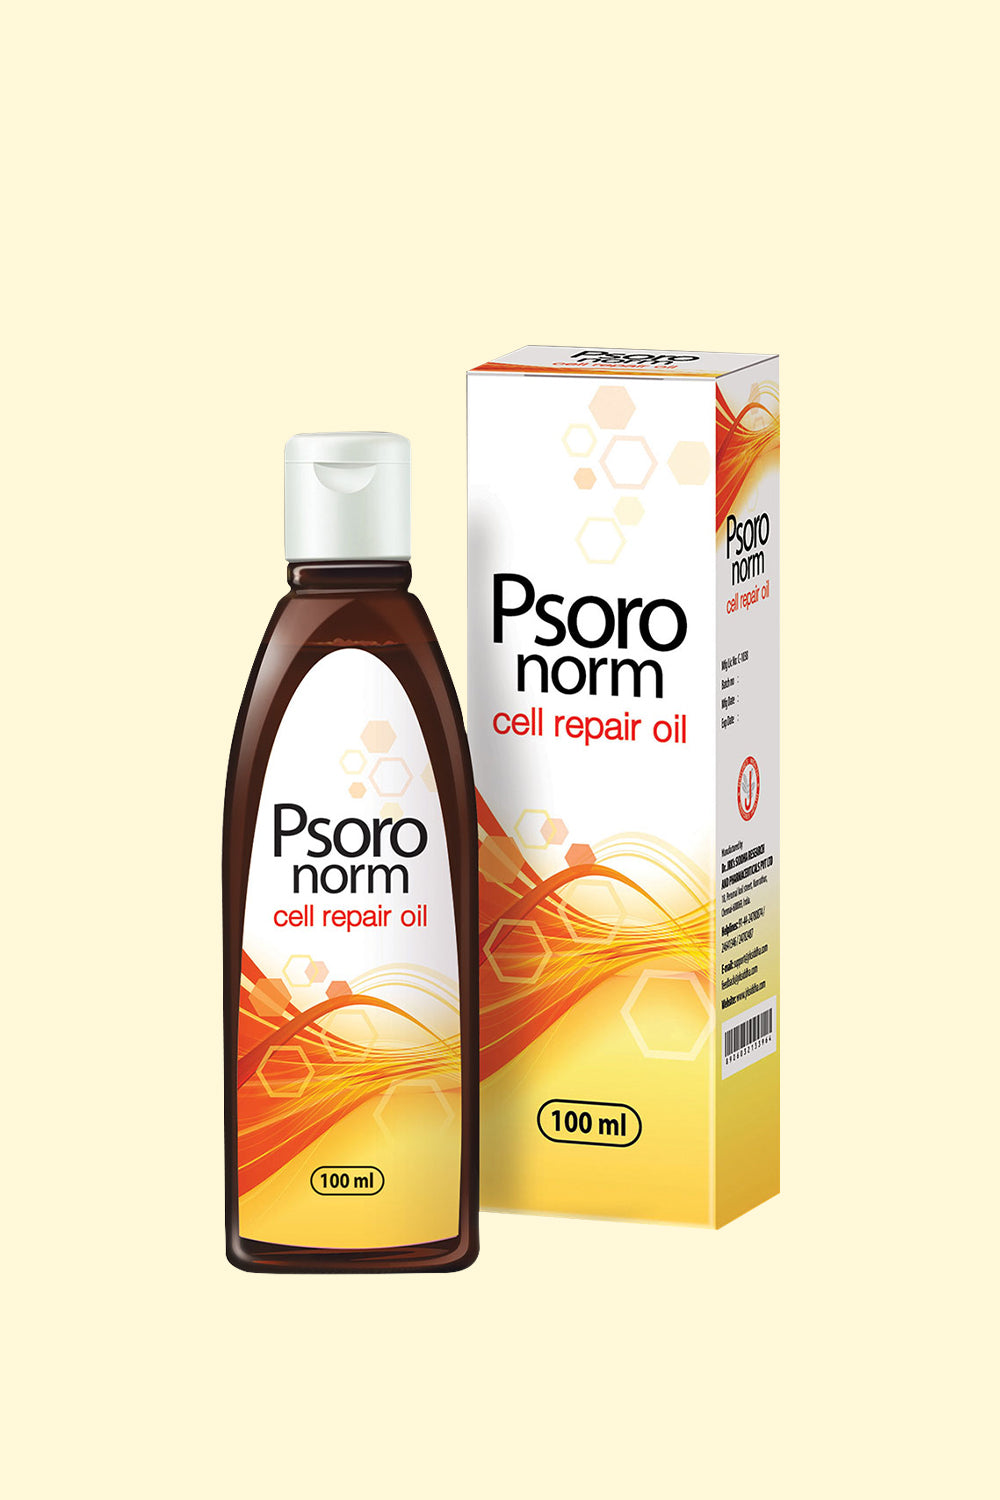 Psoronorm cell repair oil 100 ml